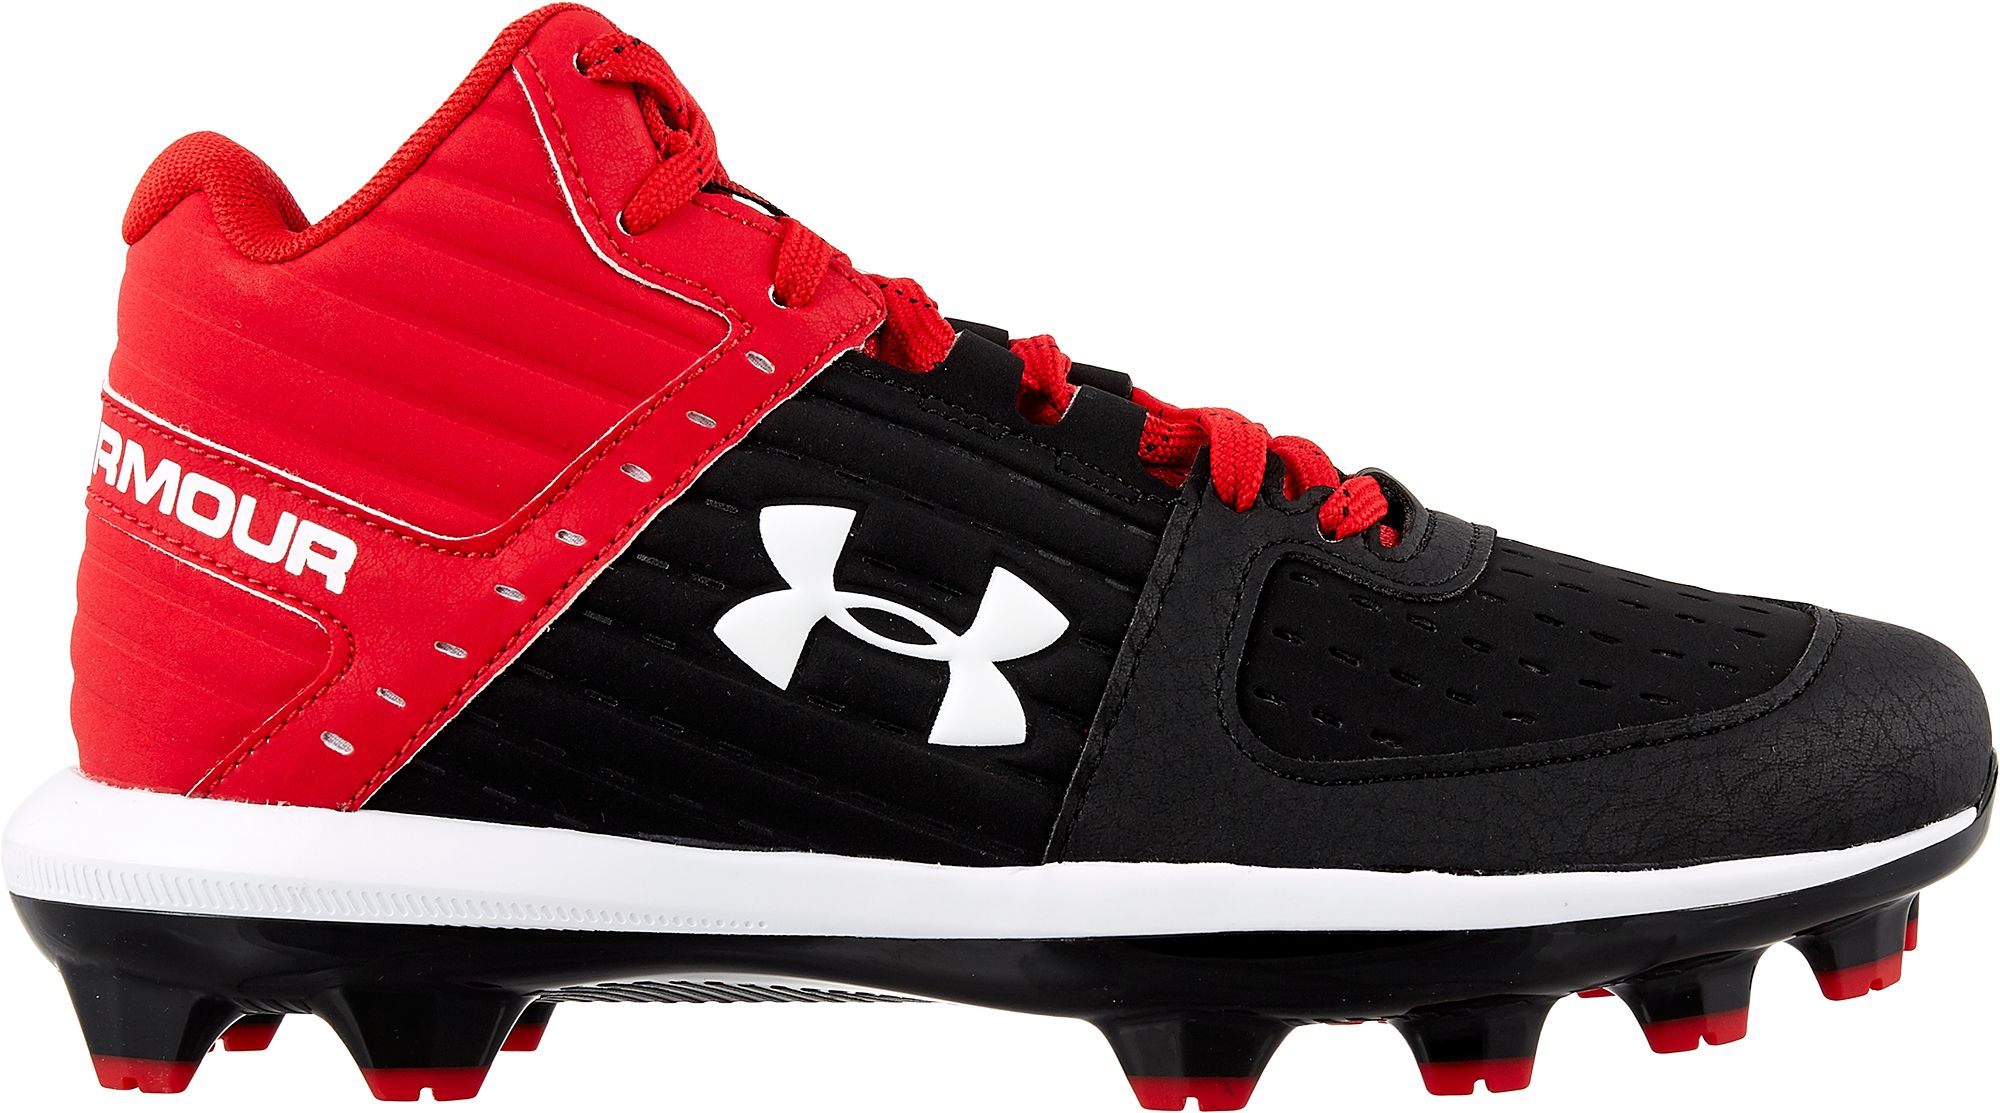 red and black under armour baseball cleats